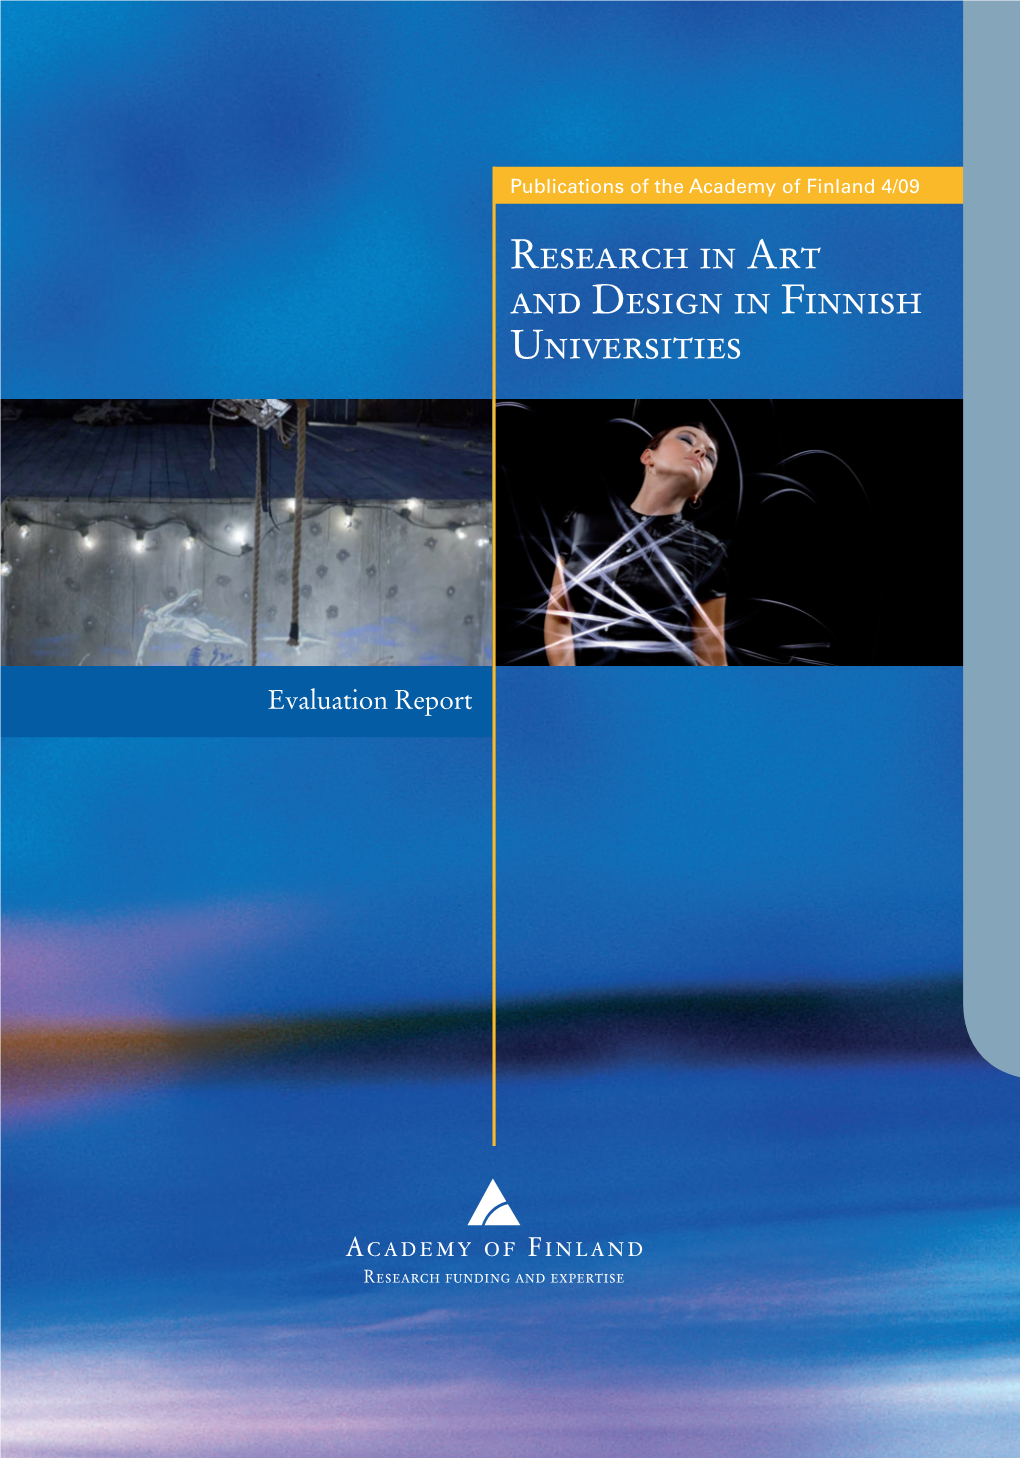 4/09 Research in Art and Design in Finnish Universities